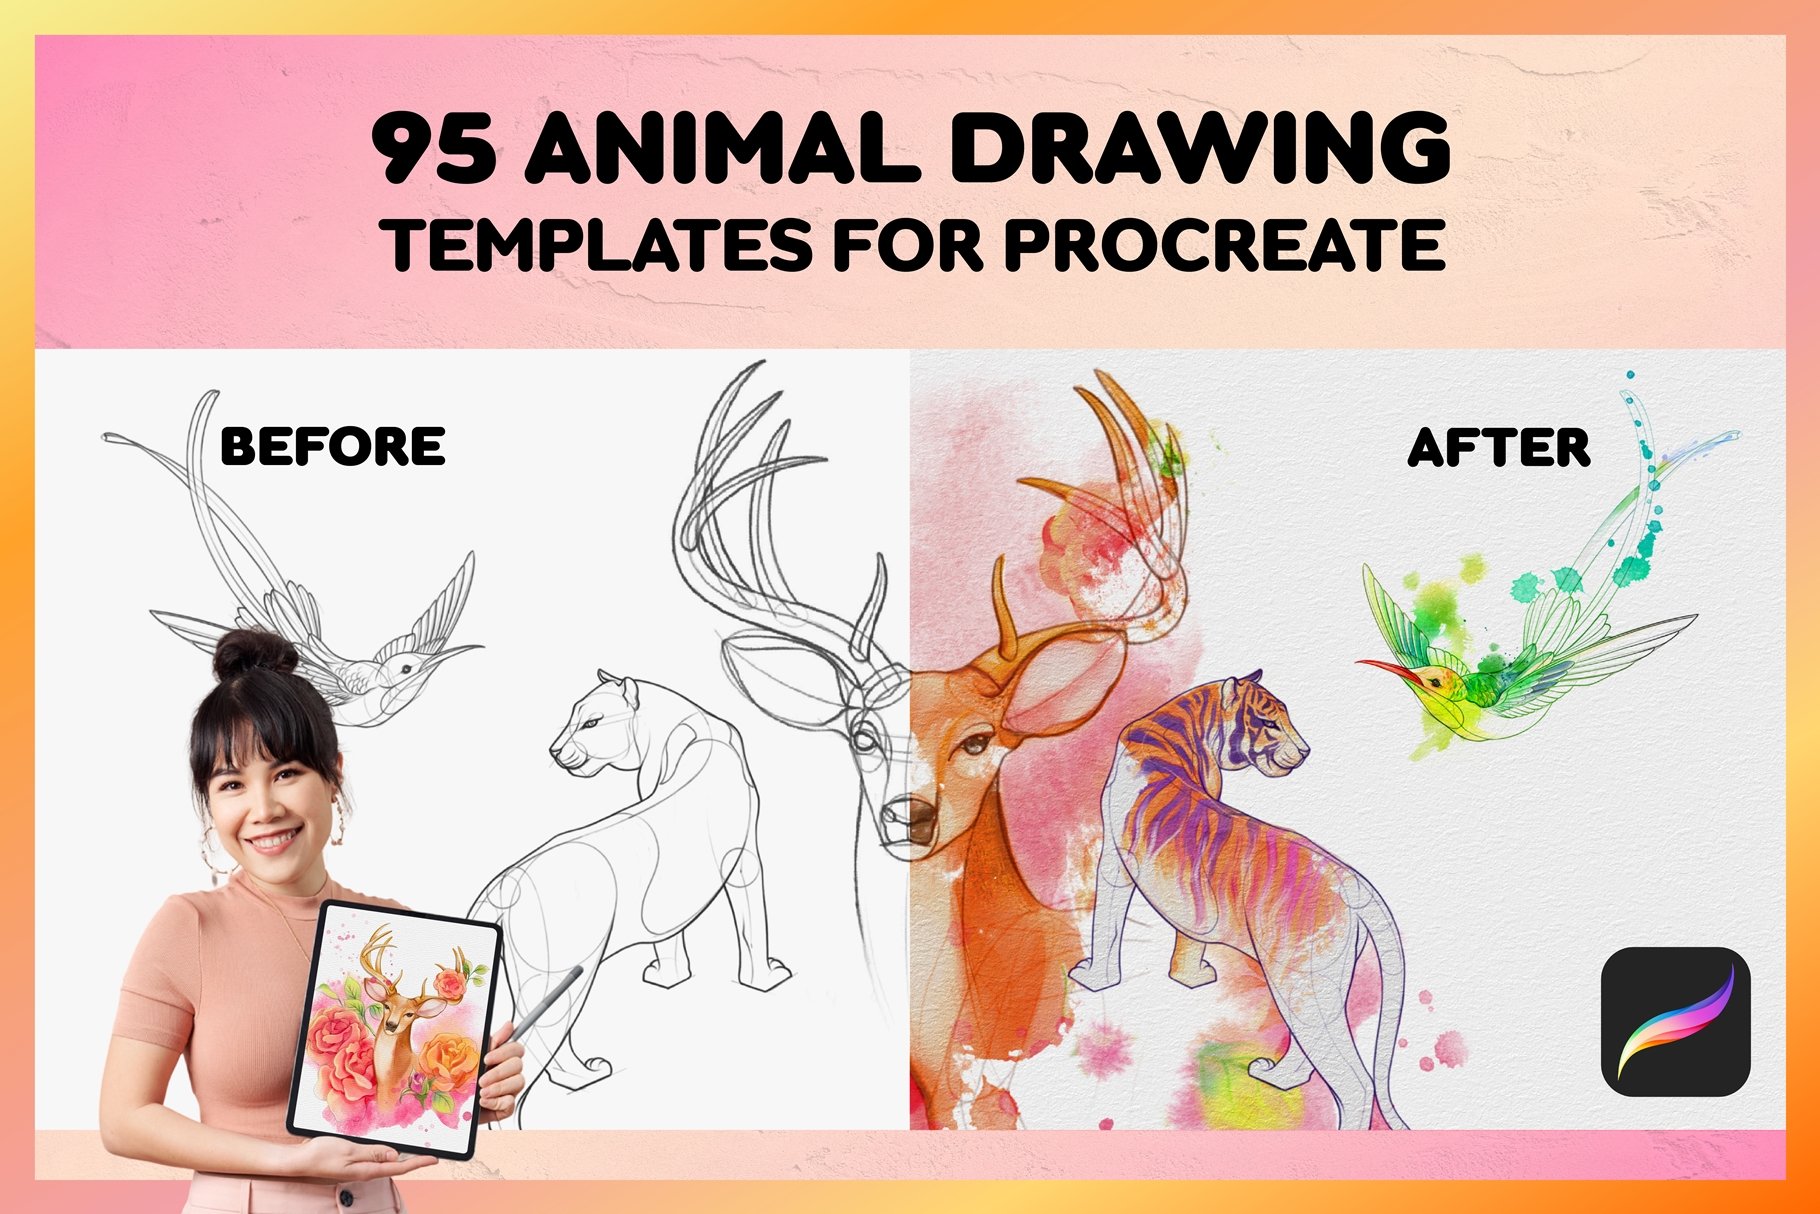 https://designcuts.b-cdn.net/wp-content/uploads/2022/11/Cover_DC_95_Animal_Drawing_Templates_for_Procreate.jpg